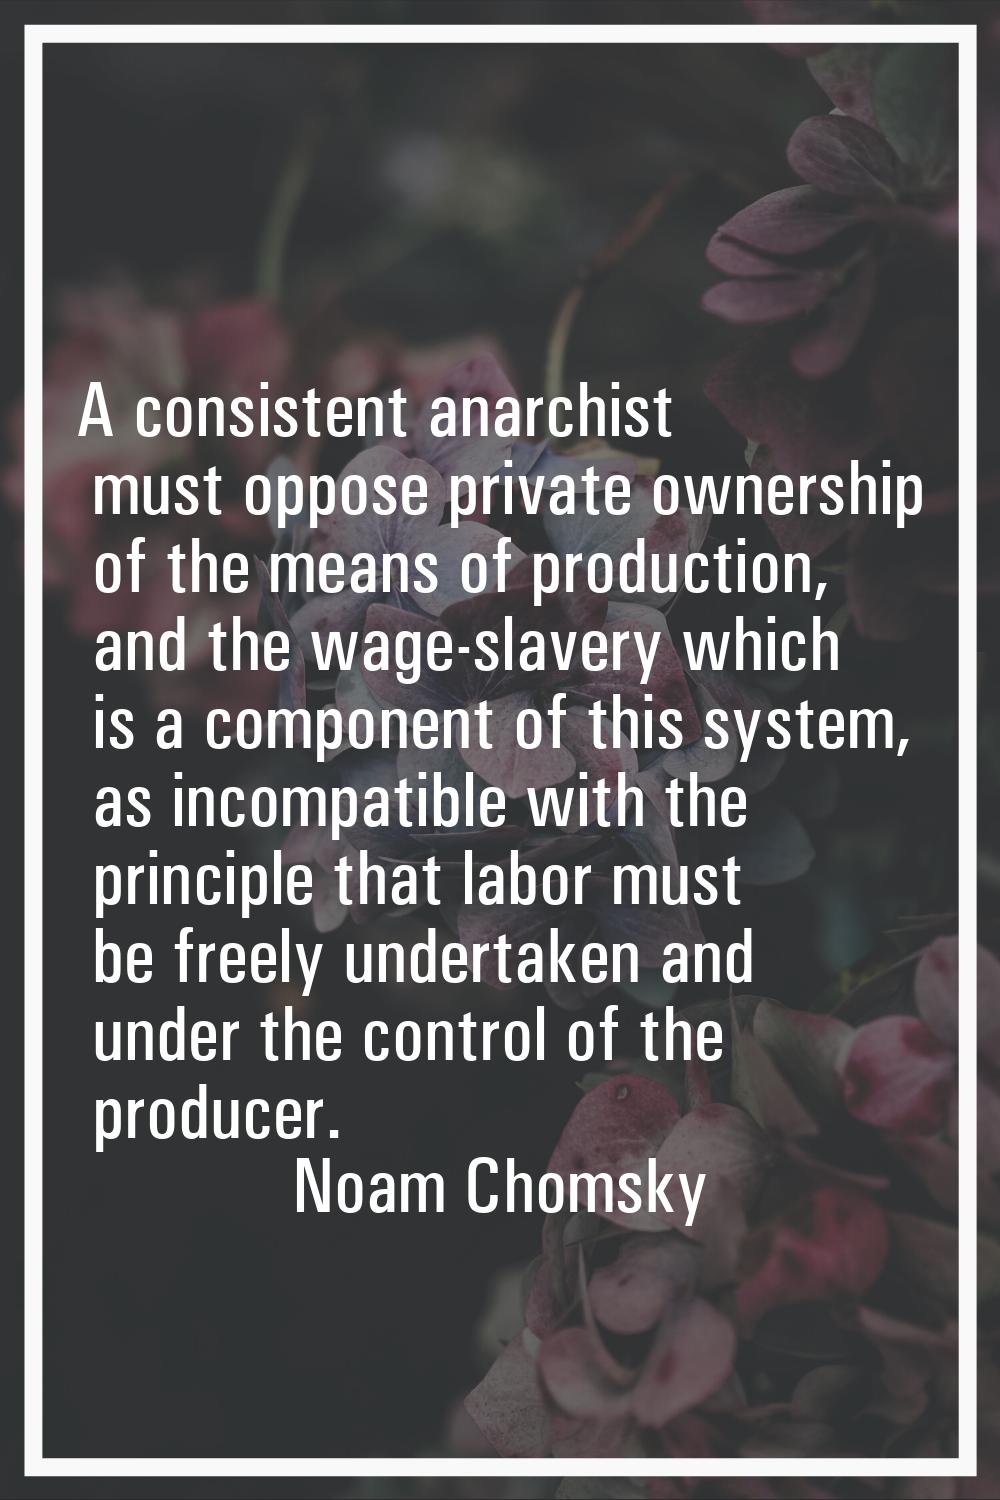 A consistent anarchist must oppose private ownership of the means of production, and the wage-slave